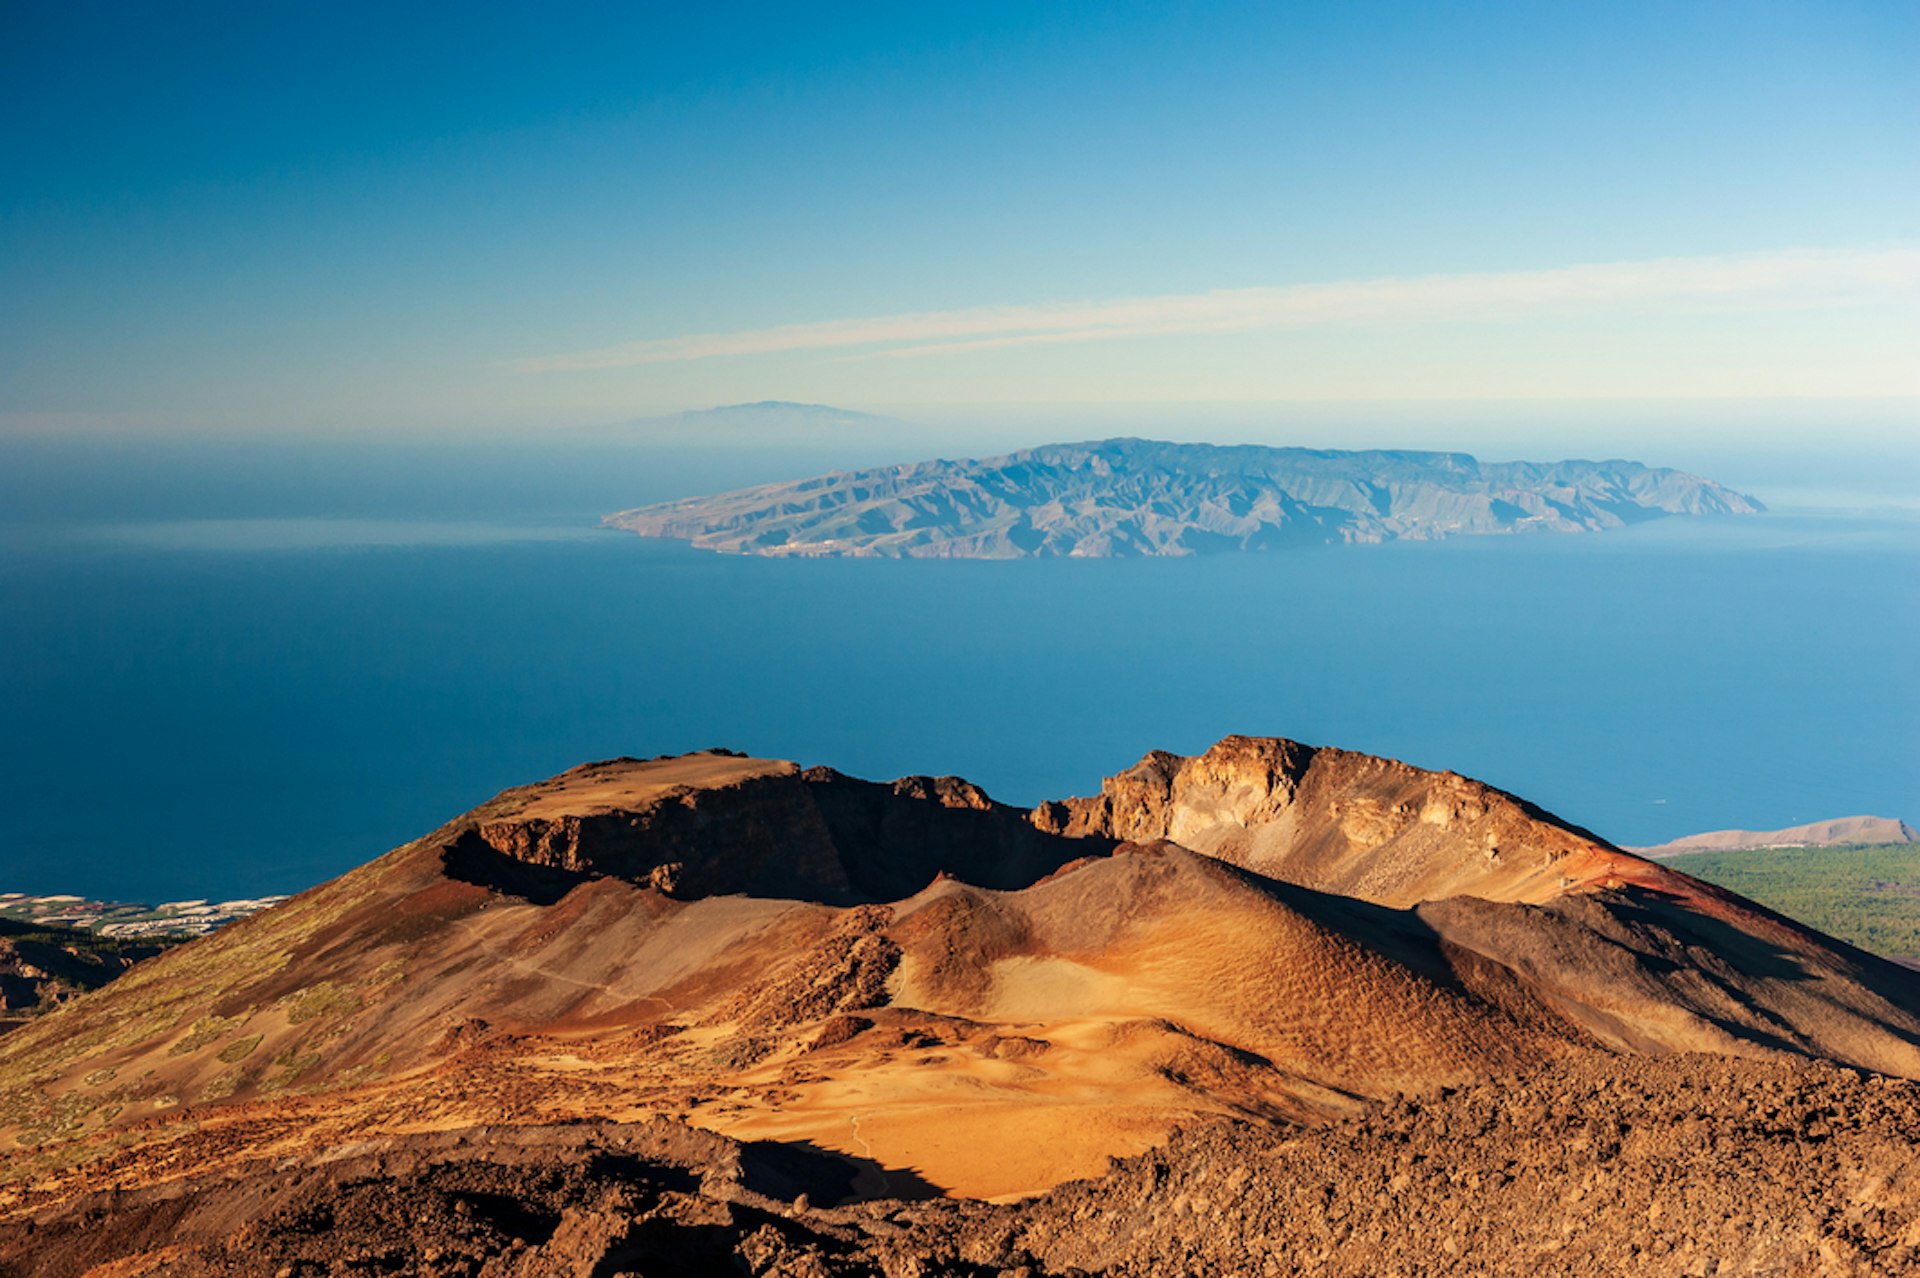 A desert crater at the top of a volcano, with islands out to sea in the distance